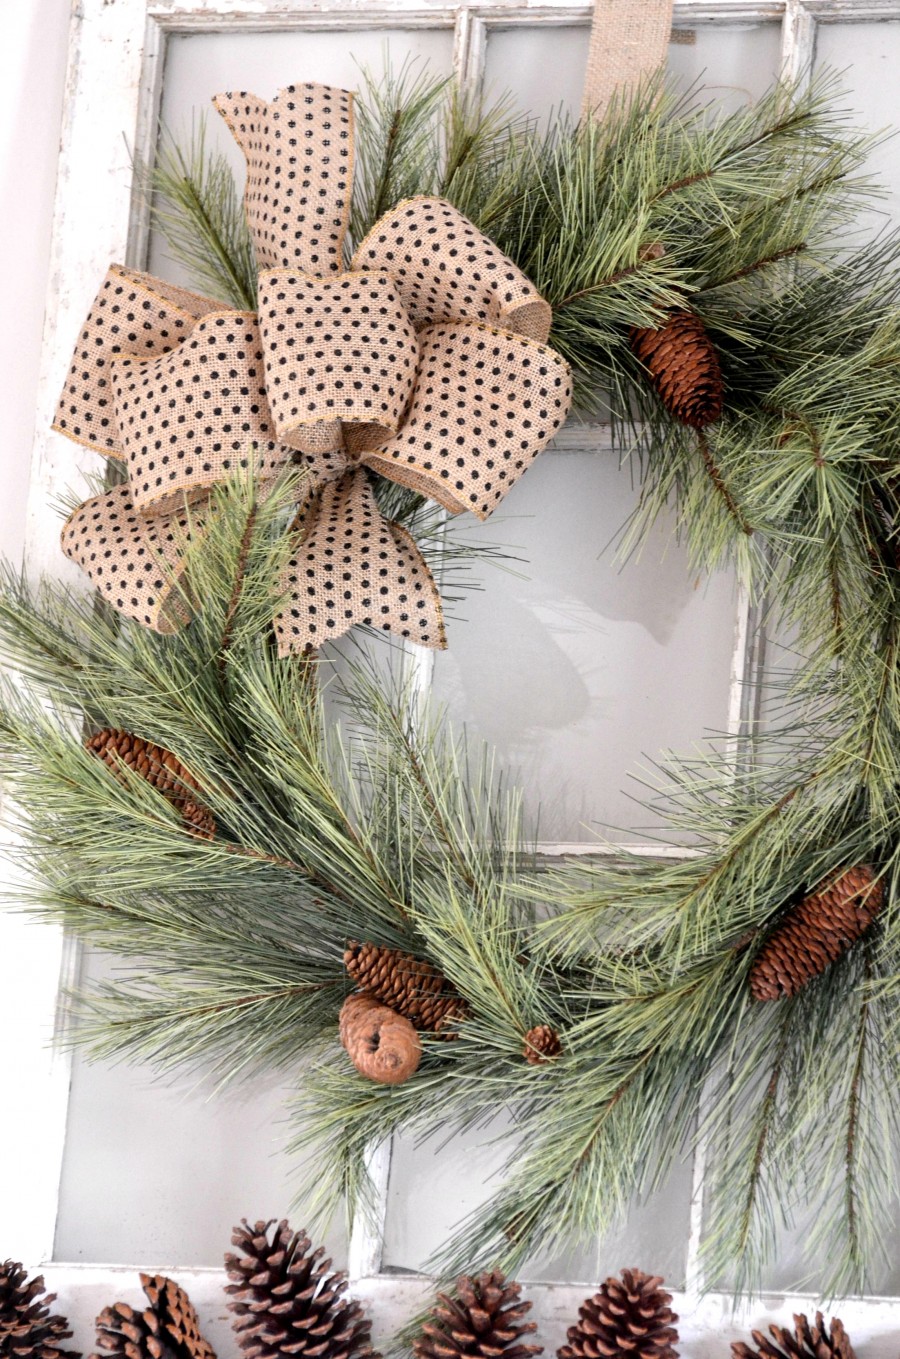 REPURPOSING A CHRISTMAS WREATH- Easy way to make an old wreath new and beautiful again!